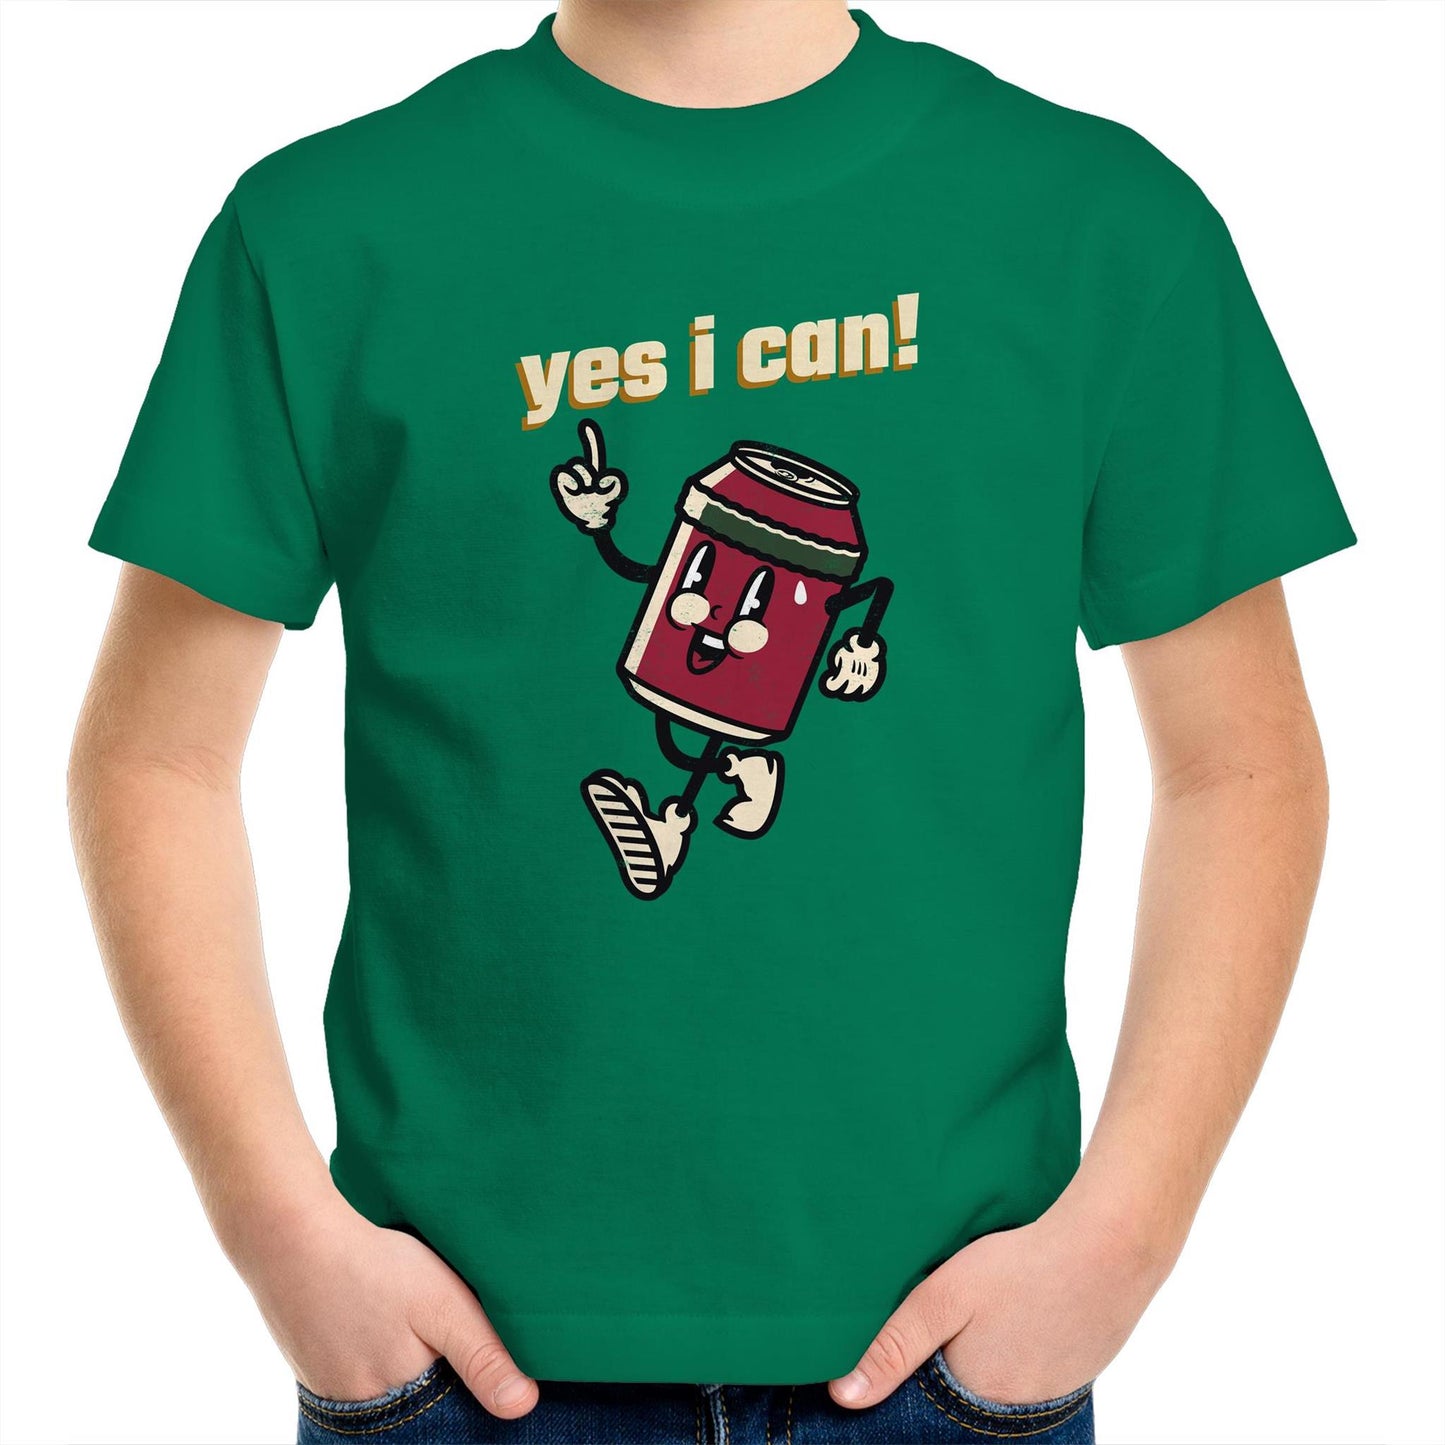 Yes I Can! - Kids Youth Crew T-Shirt Kelly Green Kids Youth T-shirt Motivation Retro